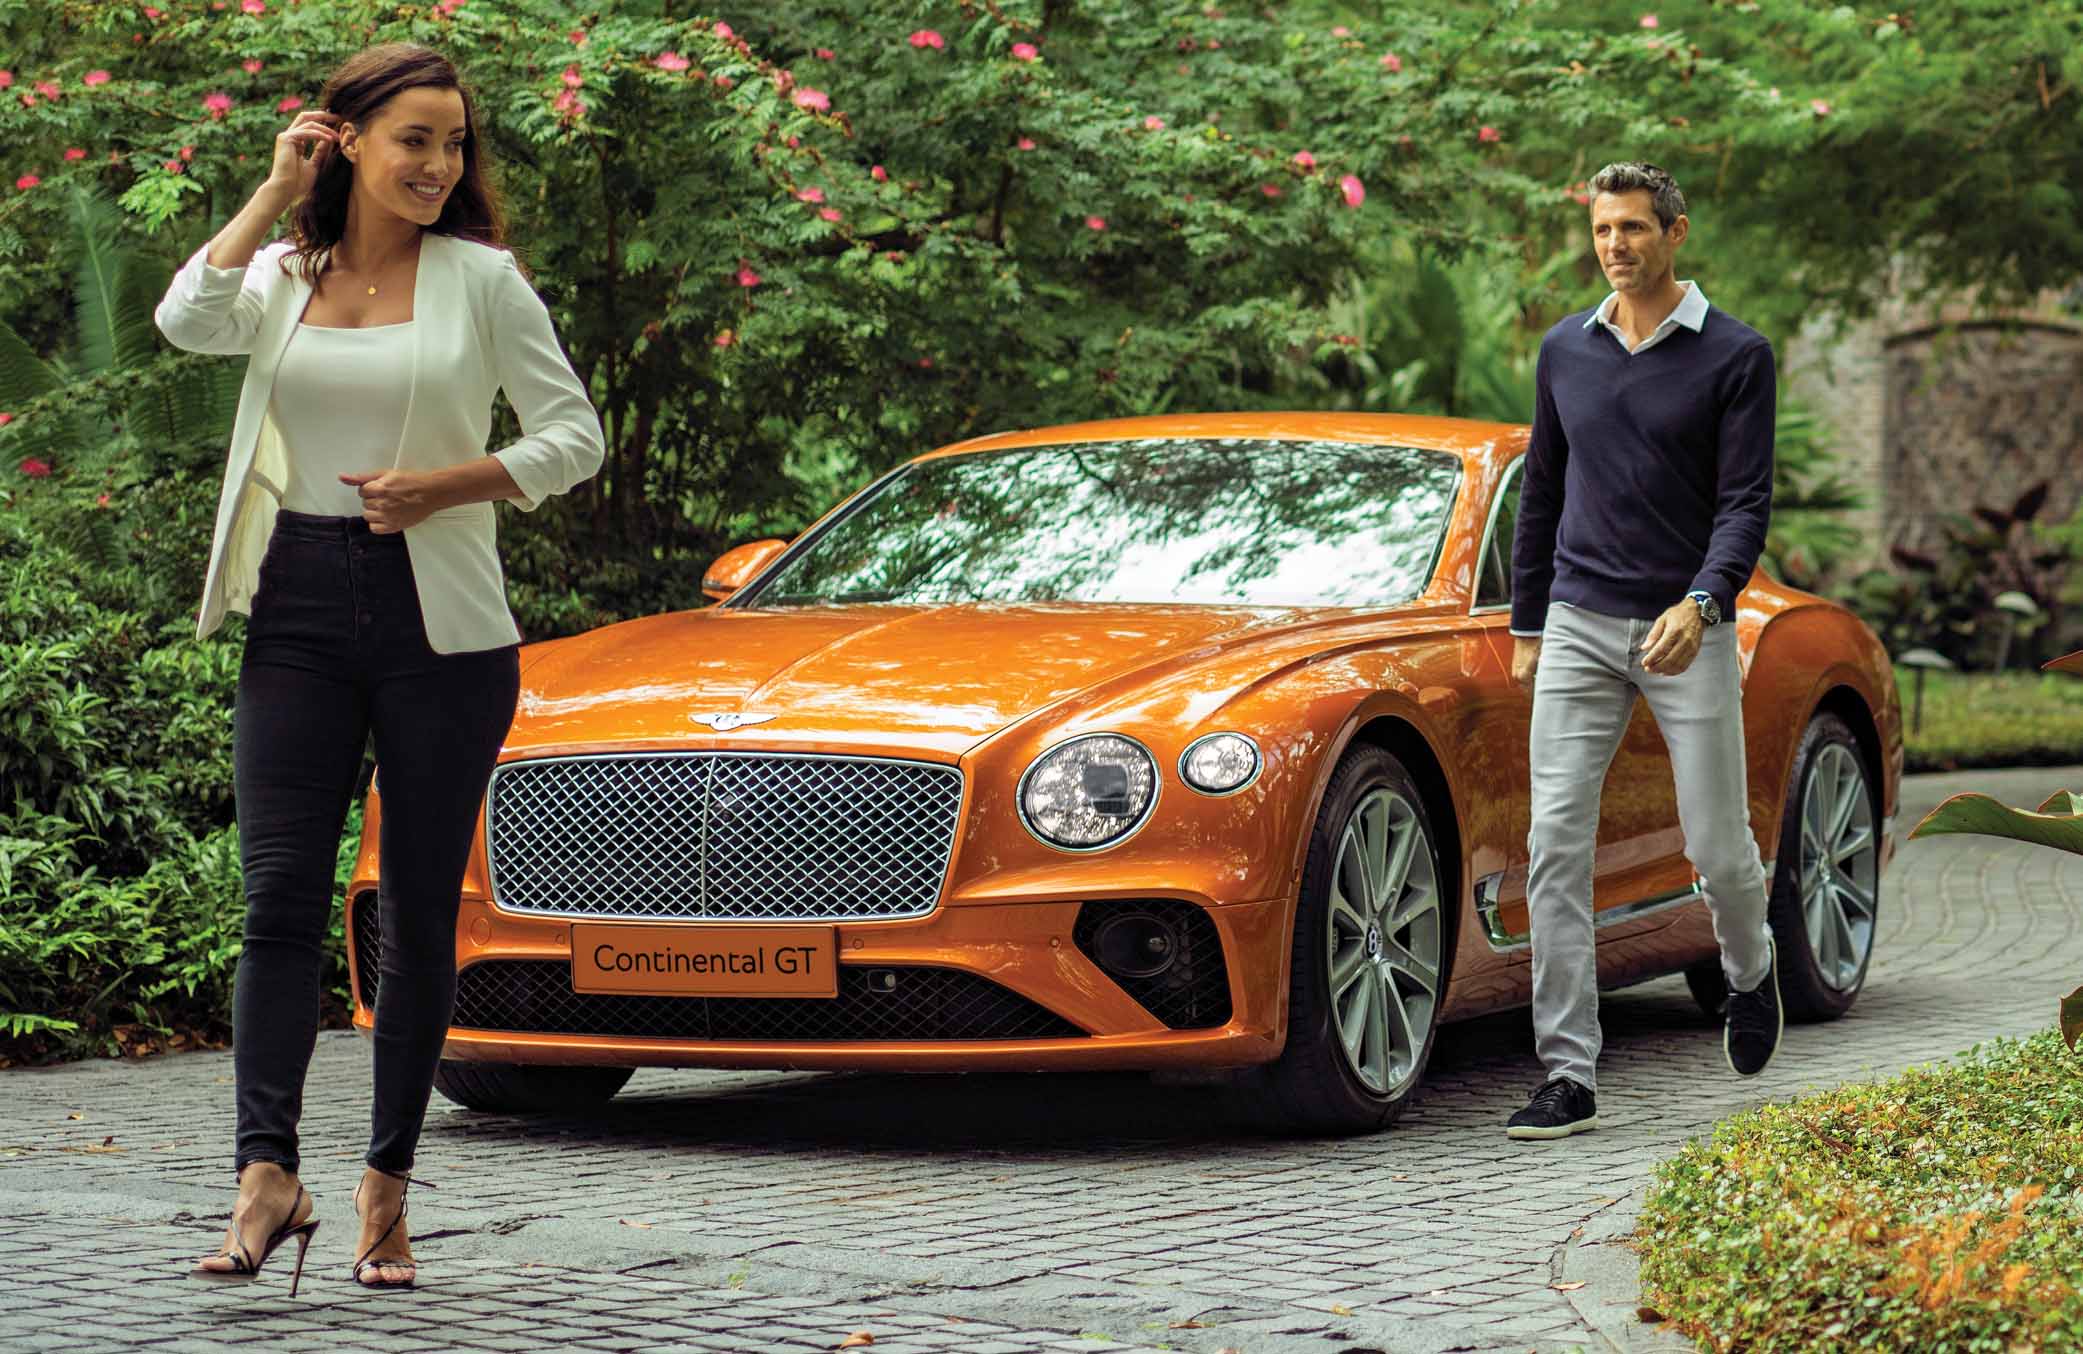 Bentley Continental GT in Driveway with couple